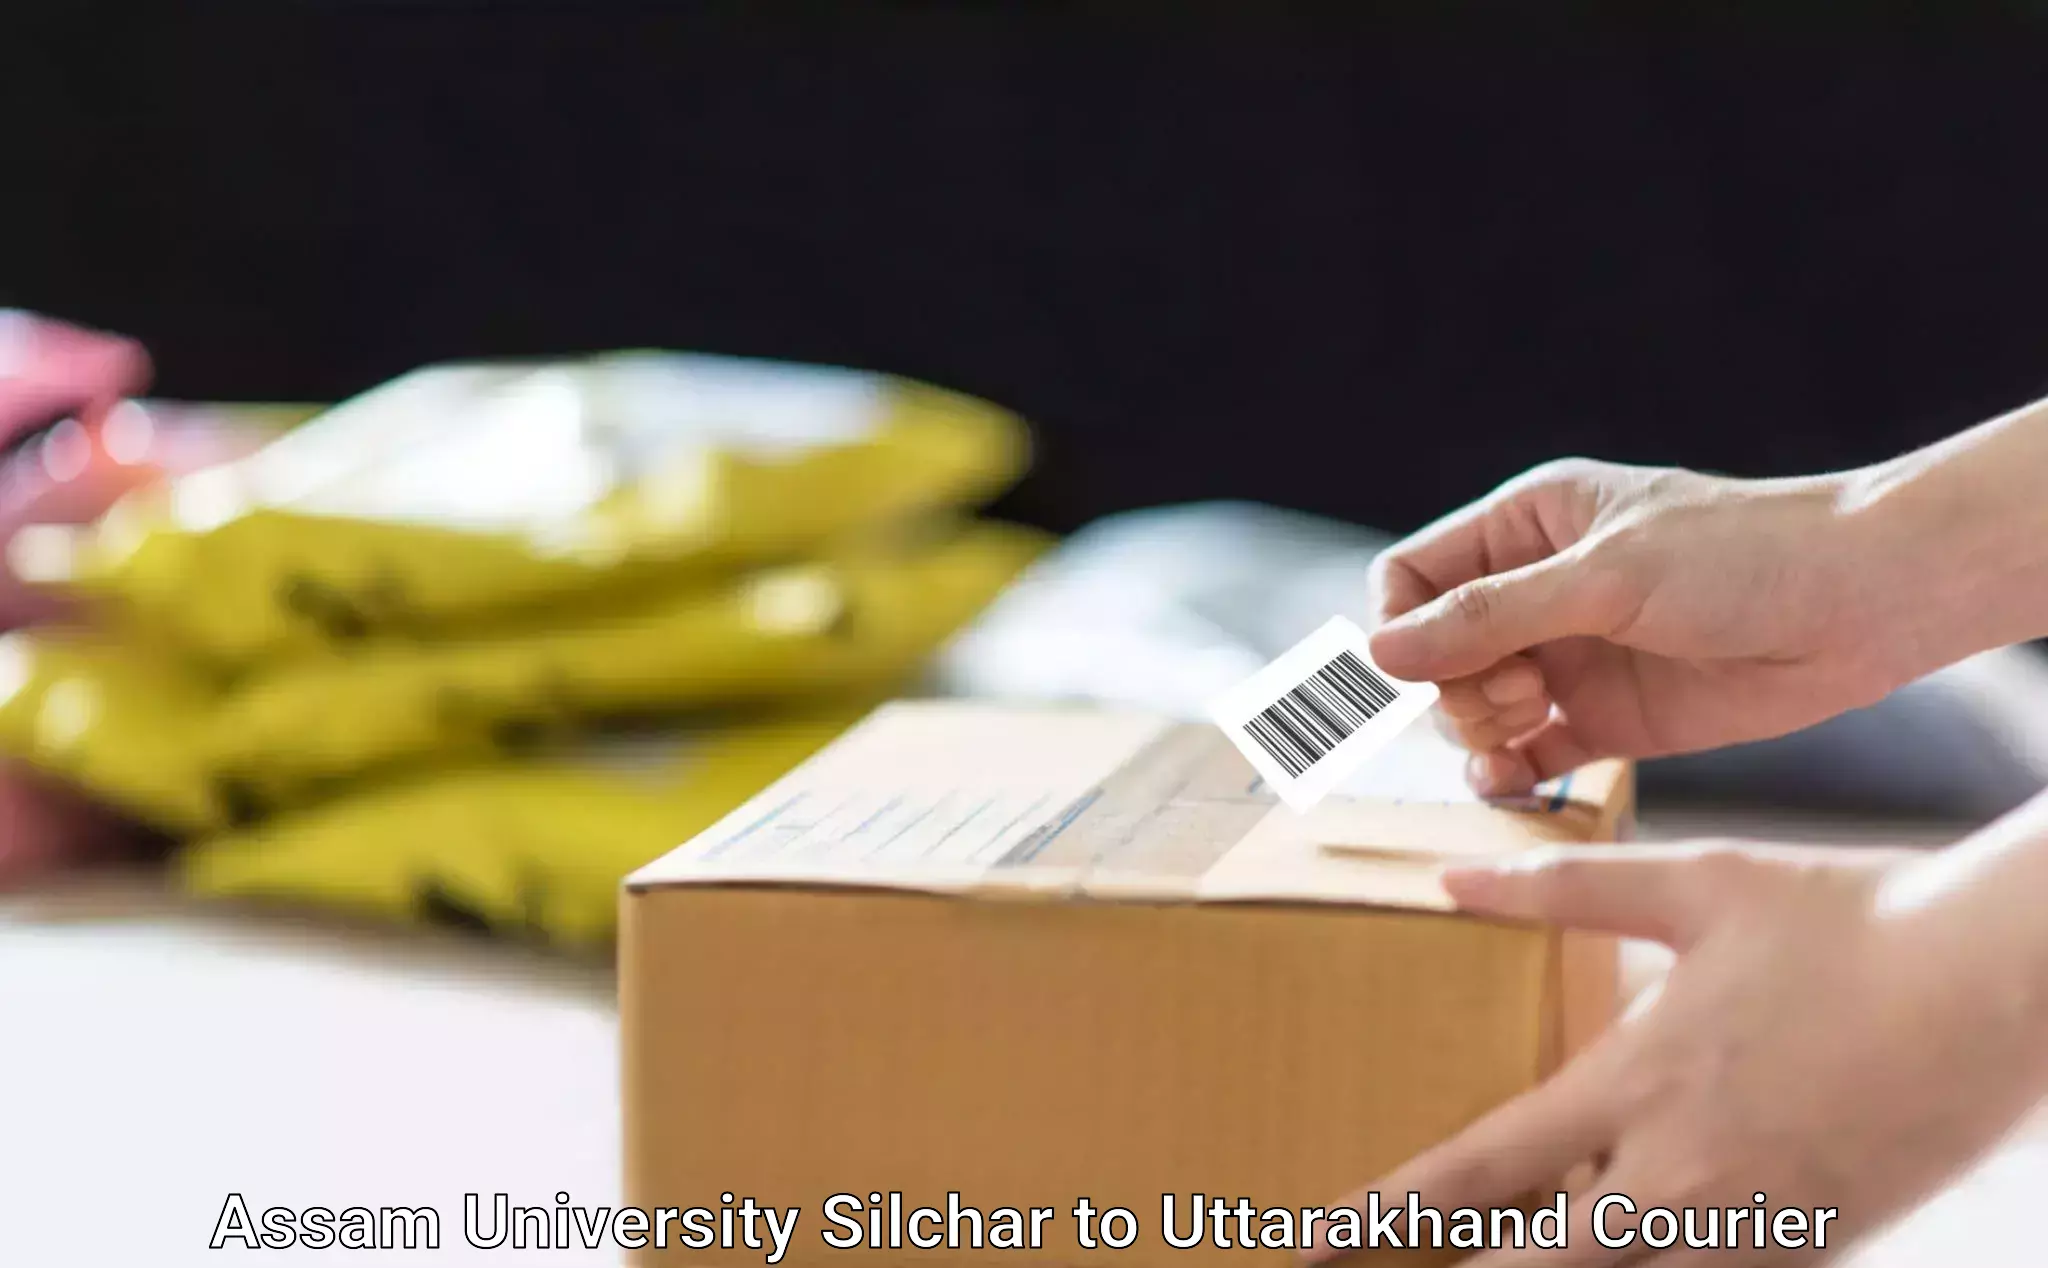 Tailored shipping services Assam University Silchar to Bhagwanpur